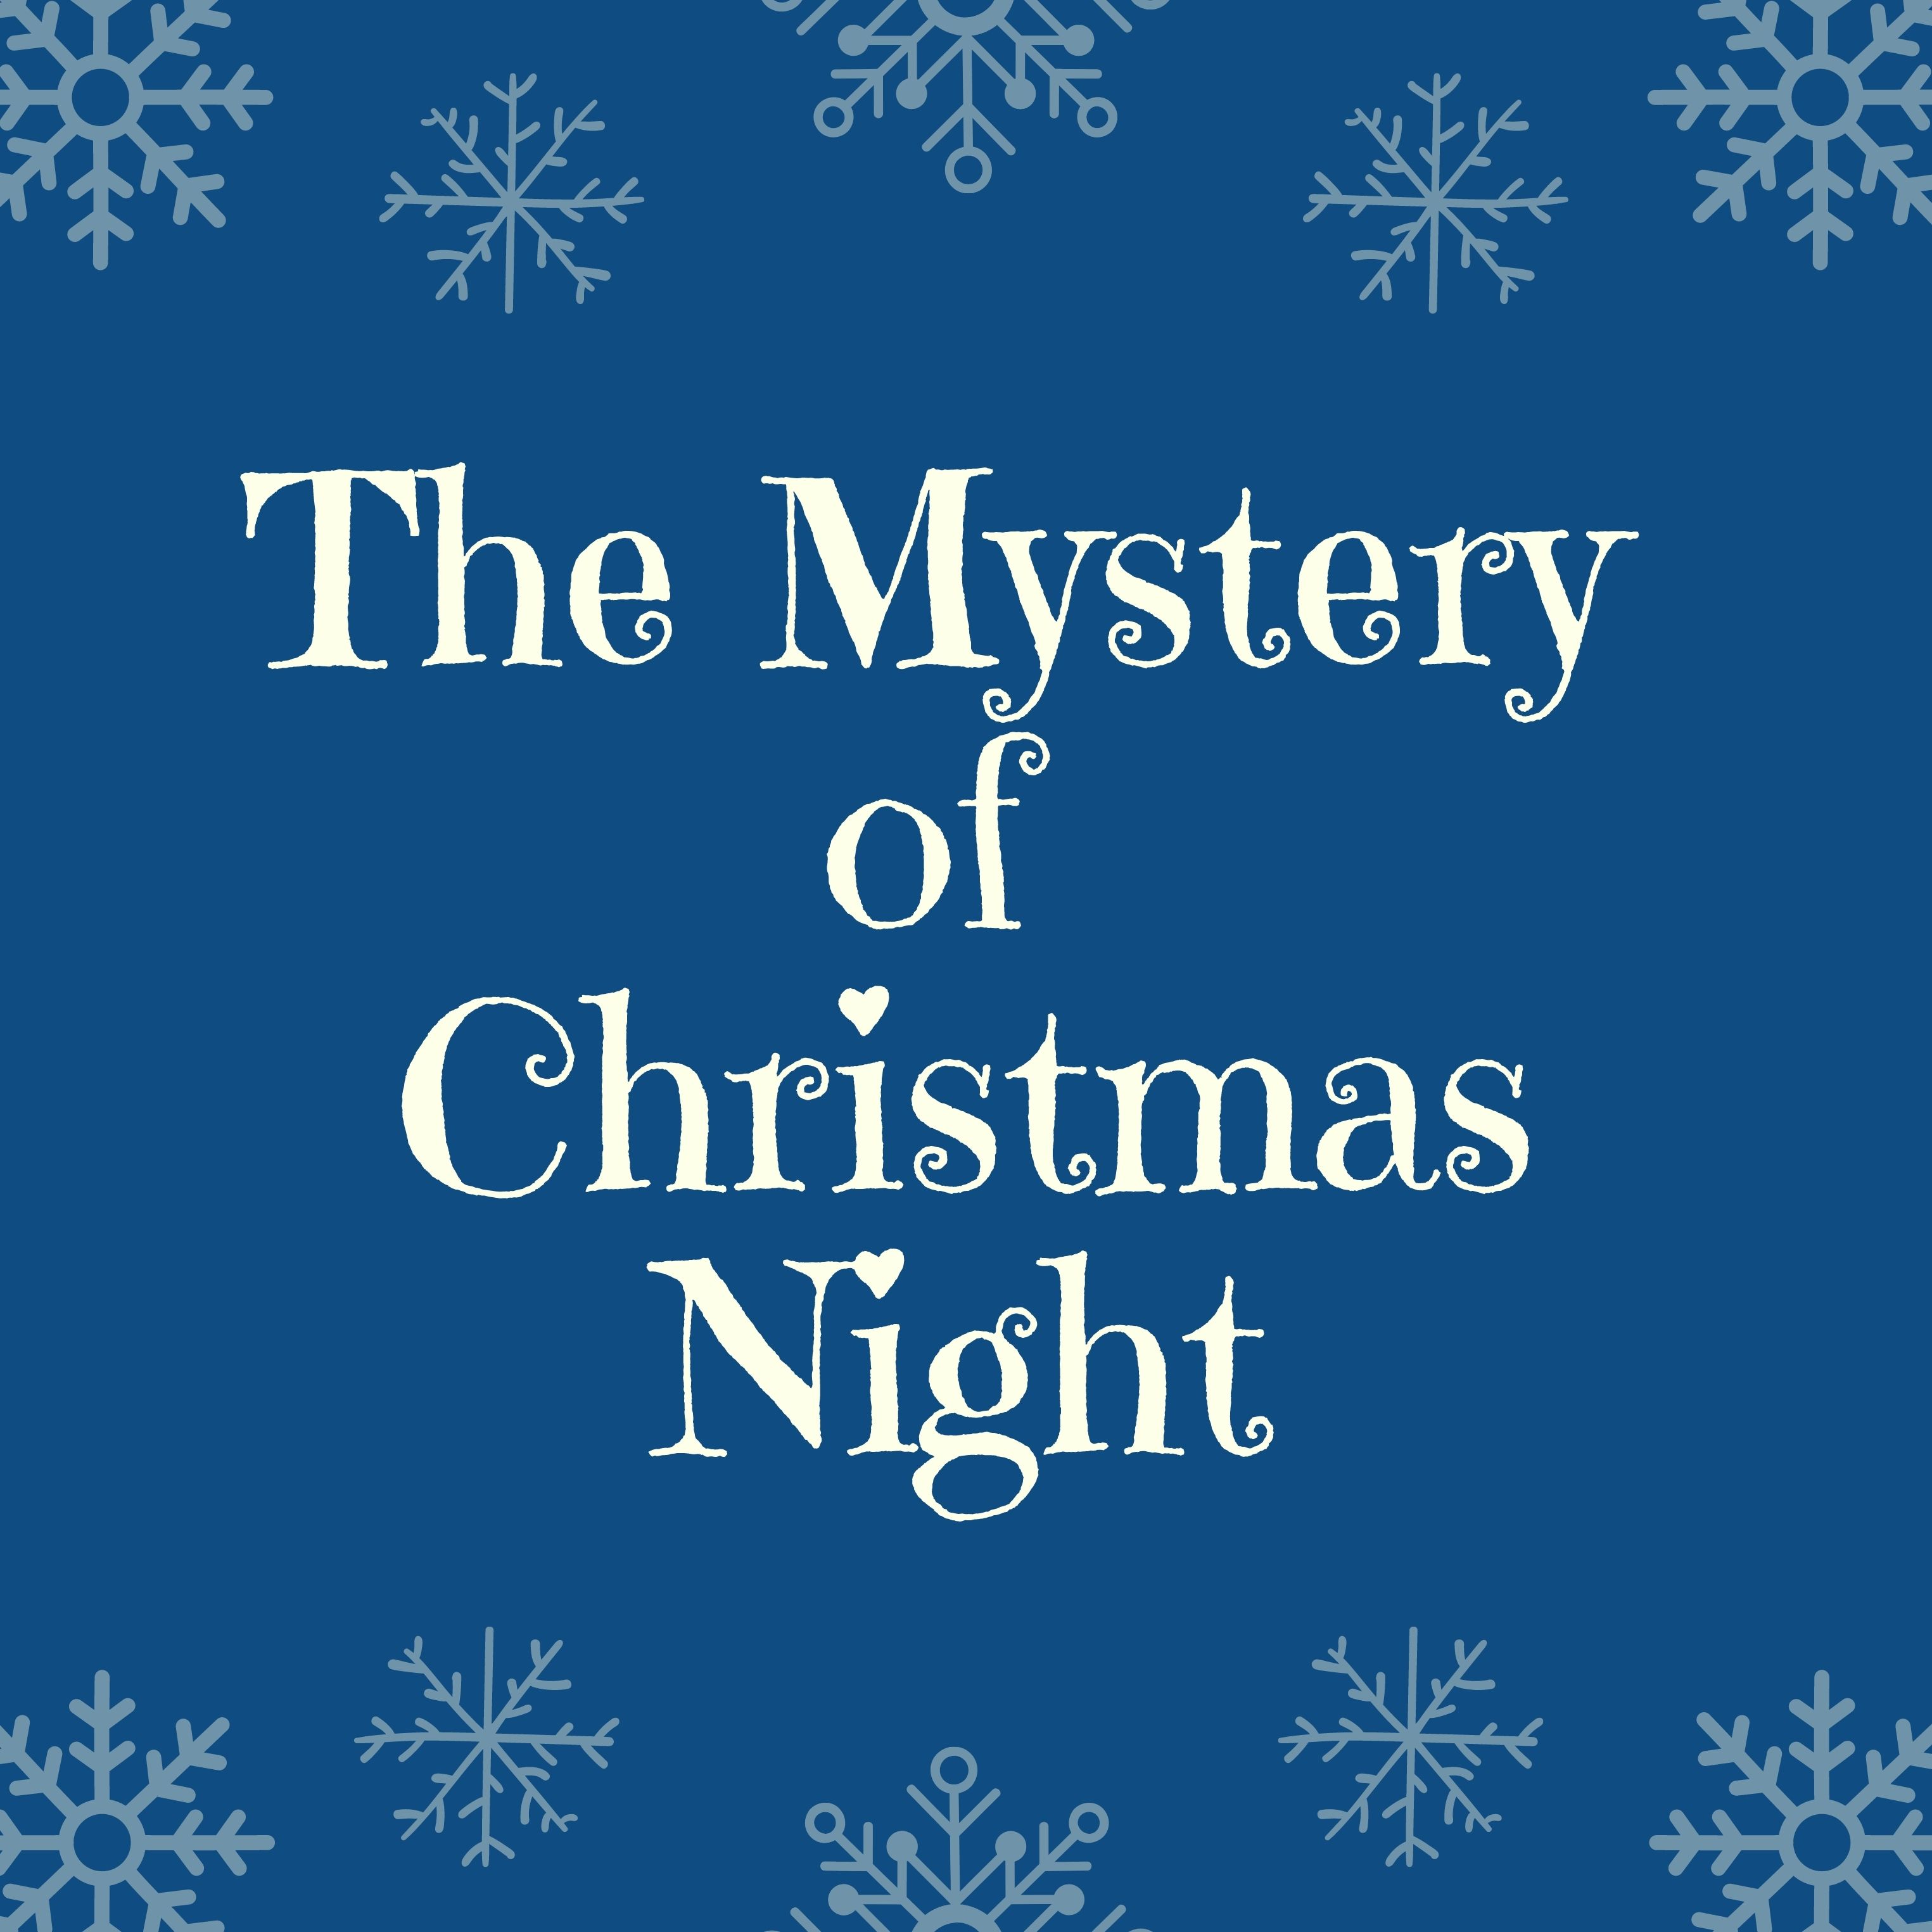 The Mystery of Christmas Night